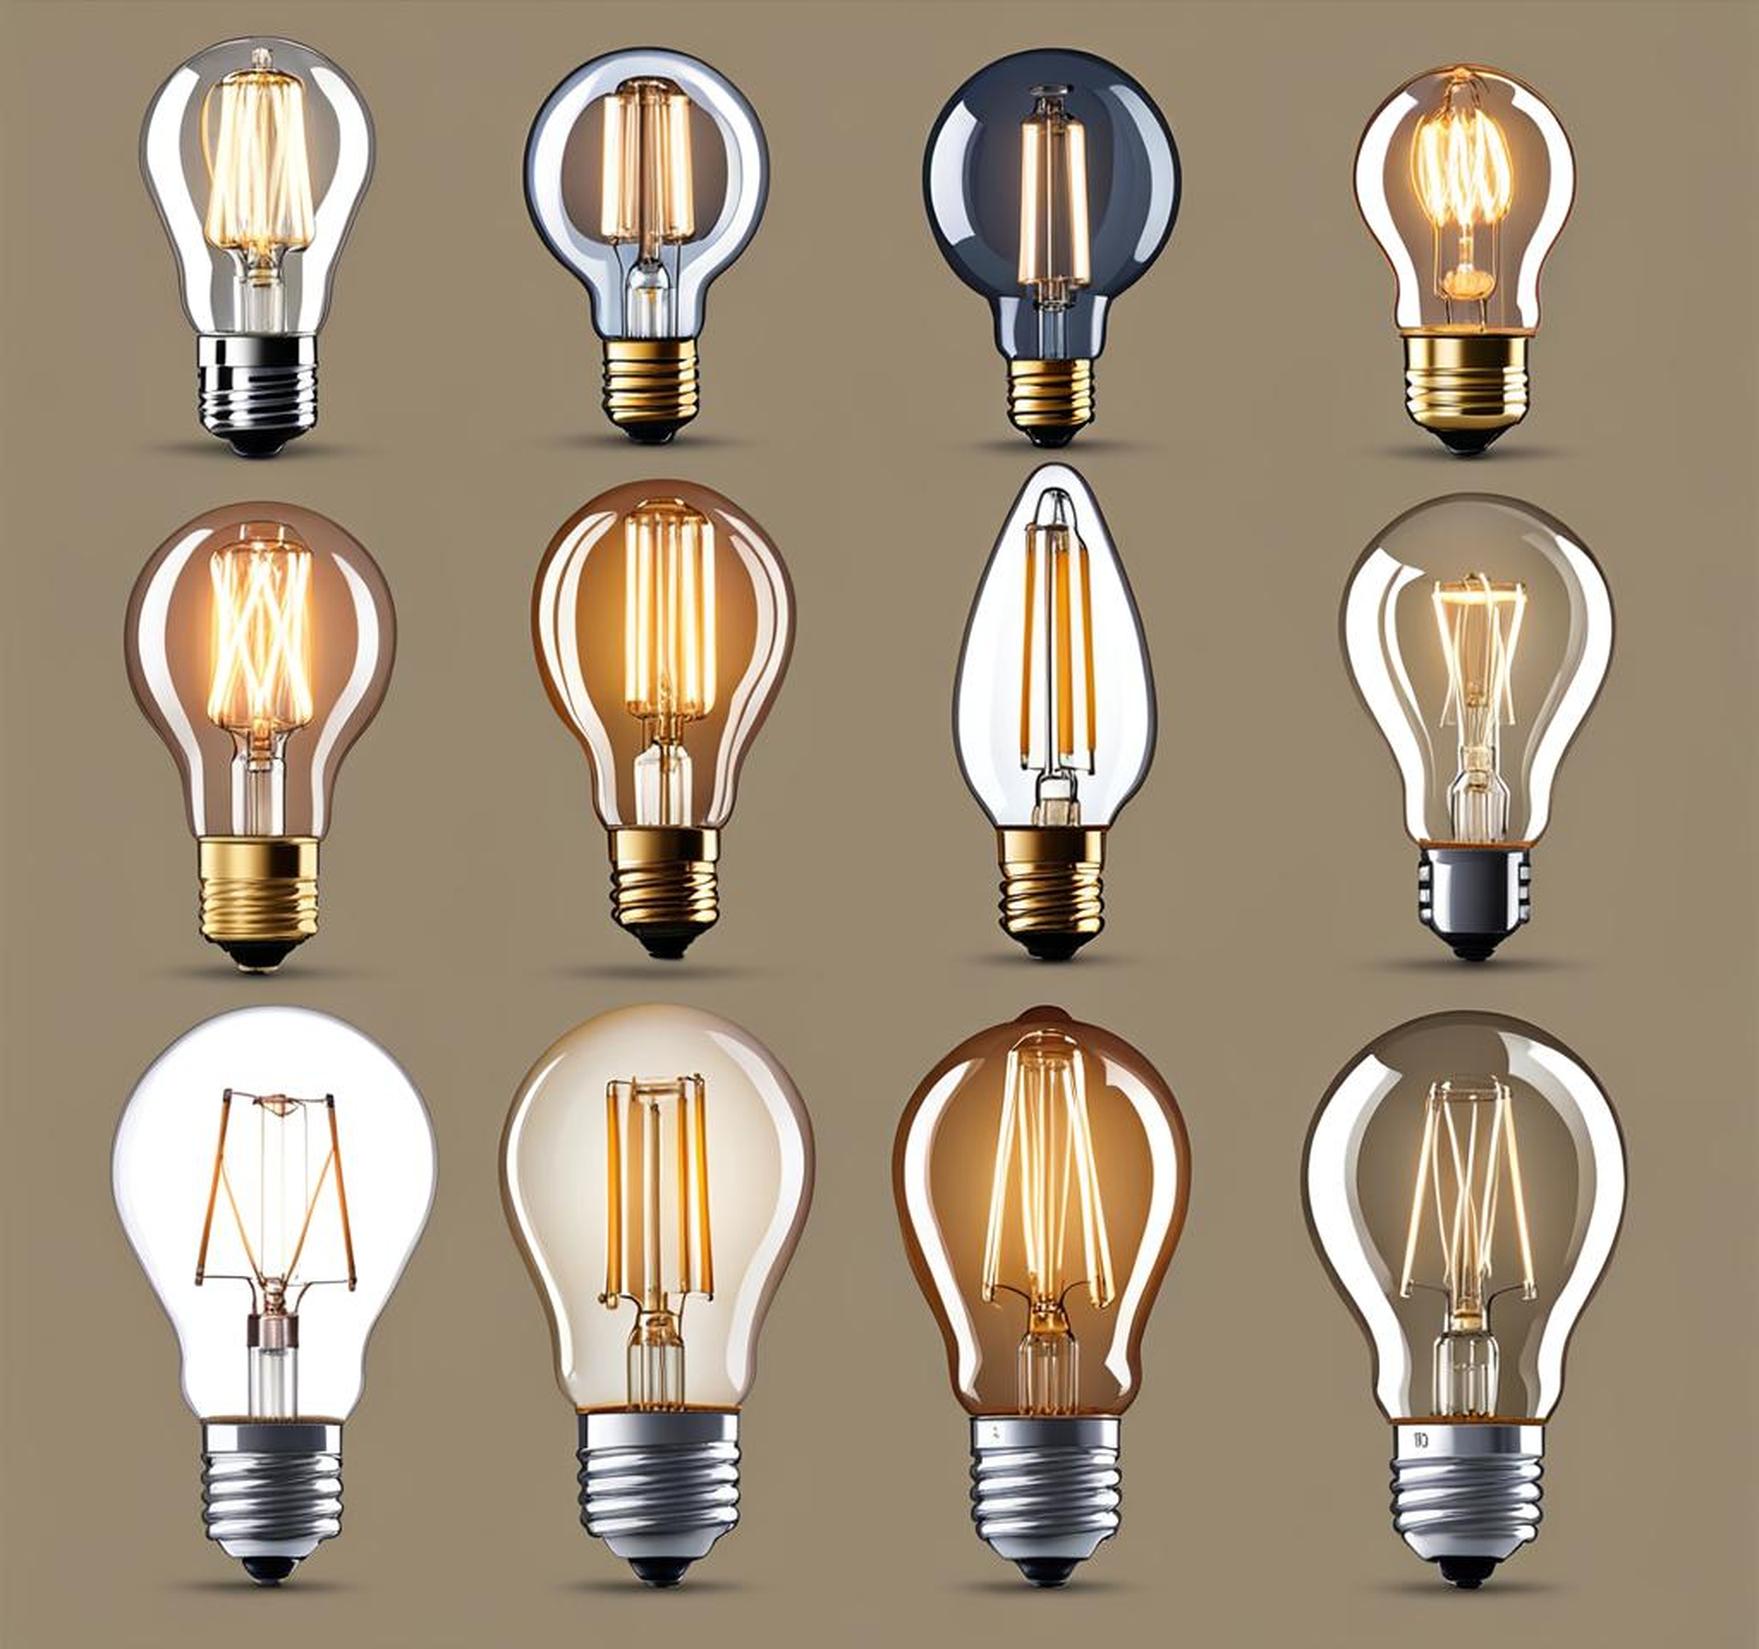 different types of light bulb bases